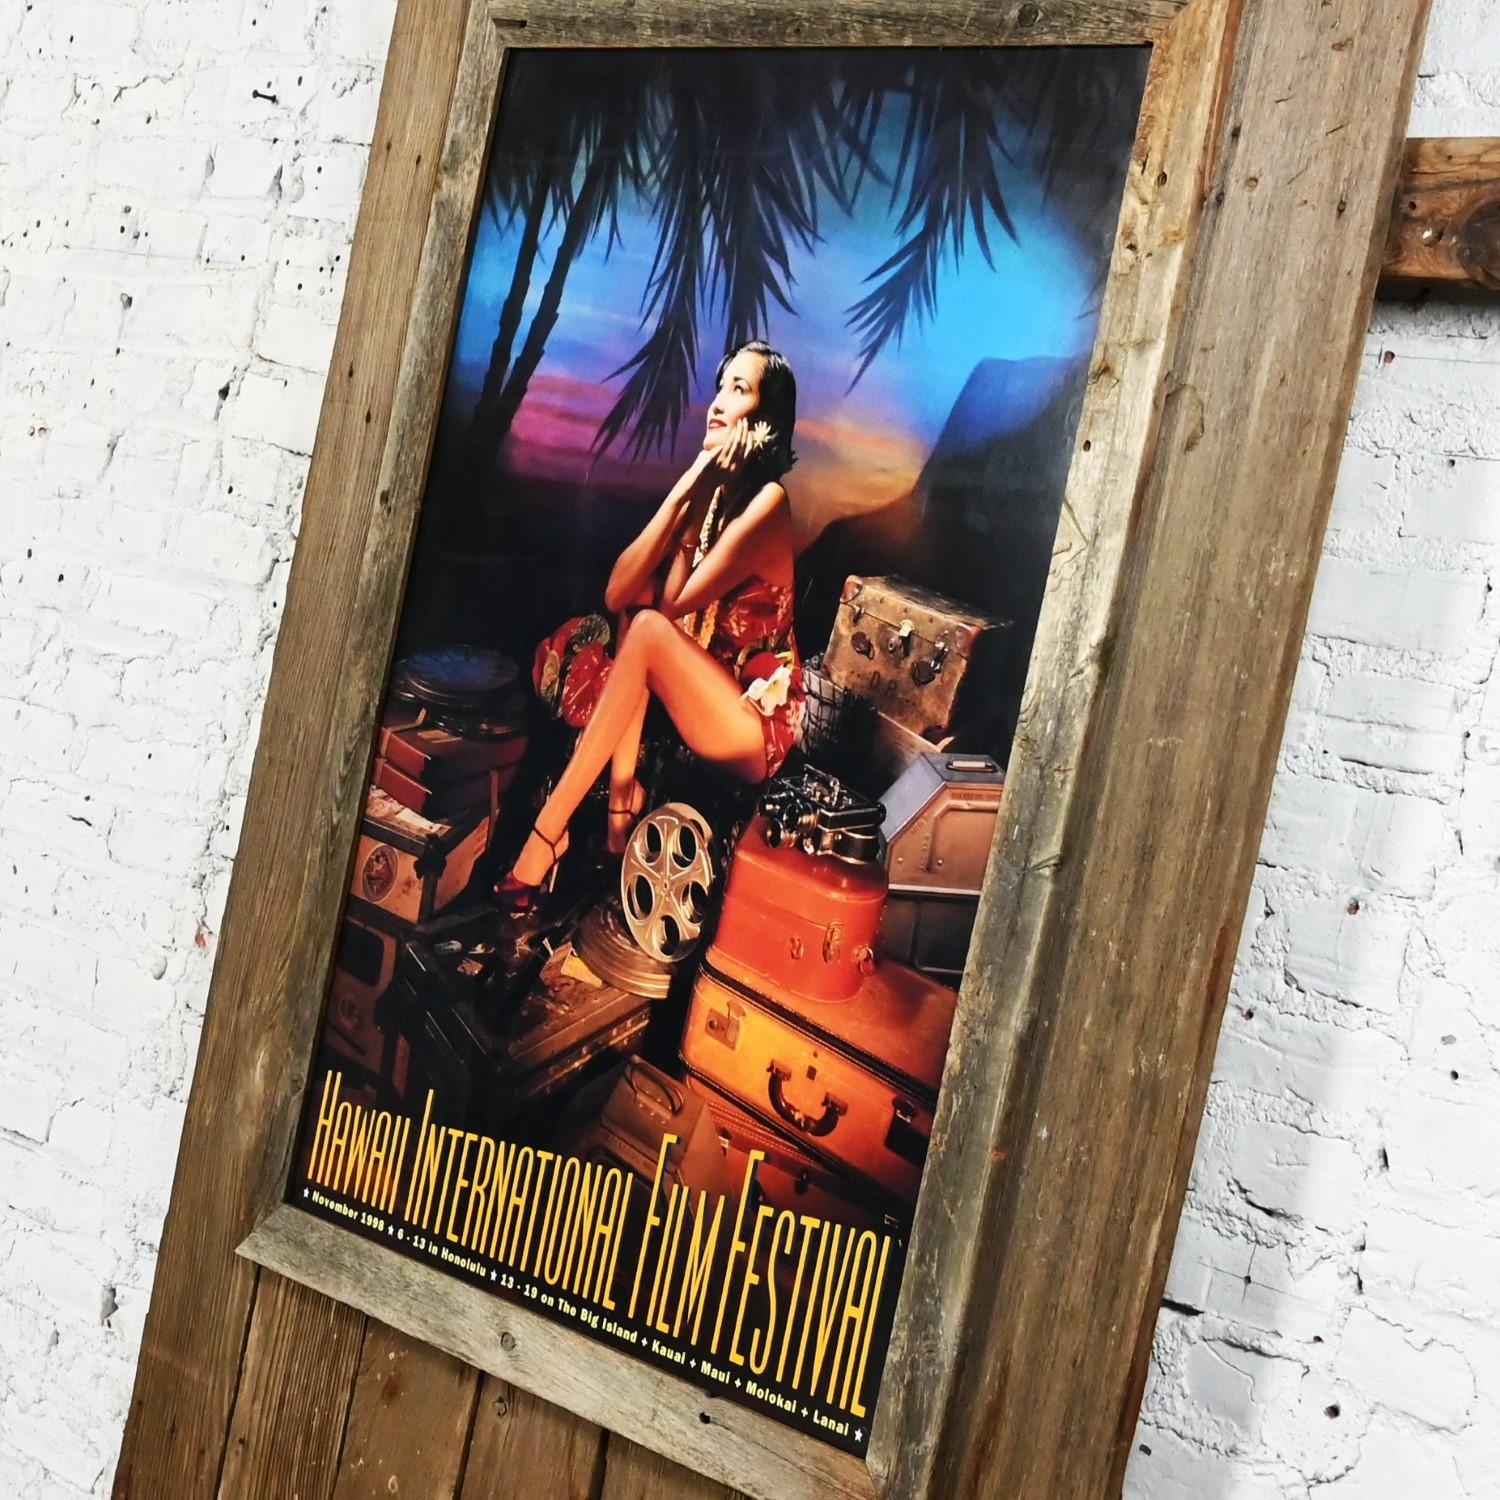 1998 Hawaii International Film Festival Movie Poster on Large Scale Rustic Wood  For Sale 5